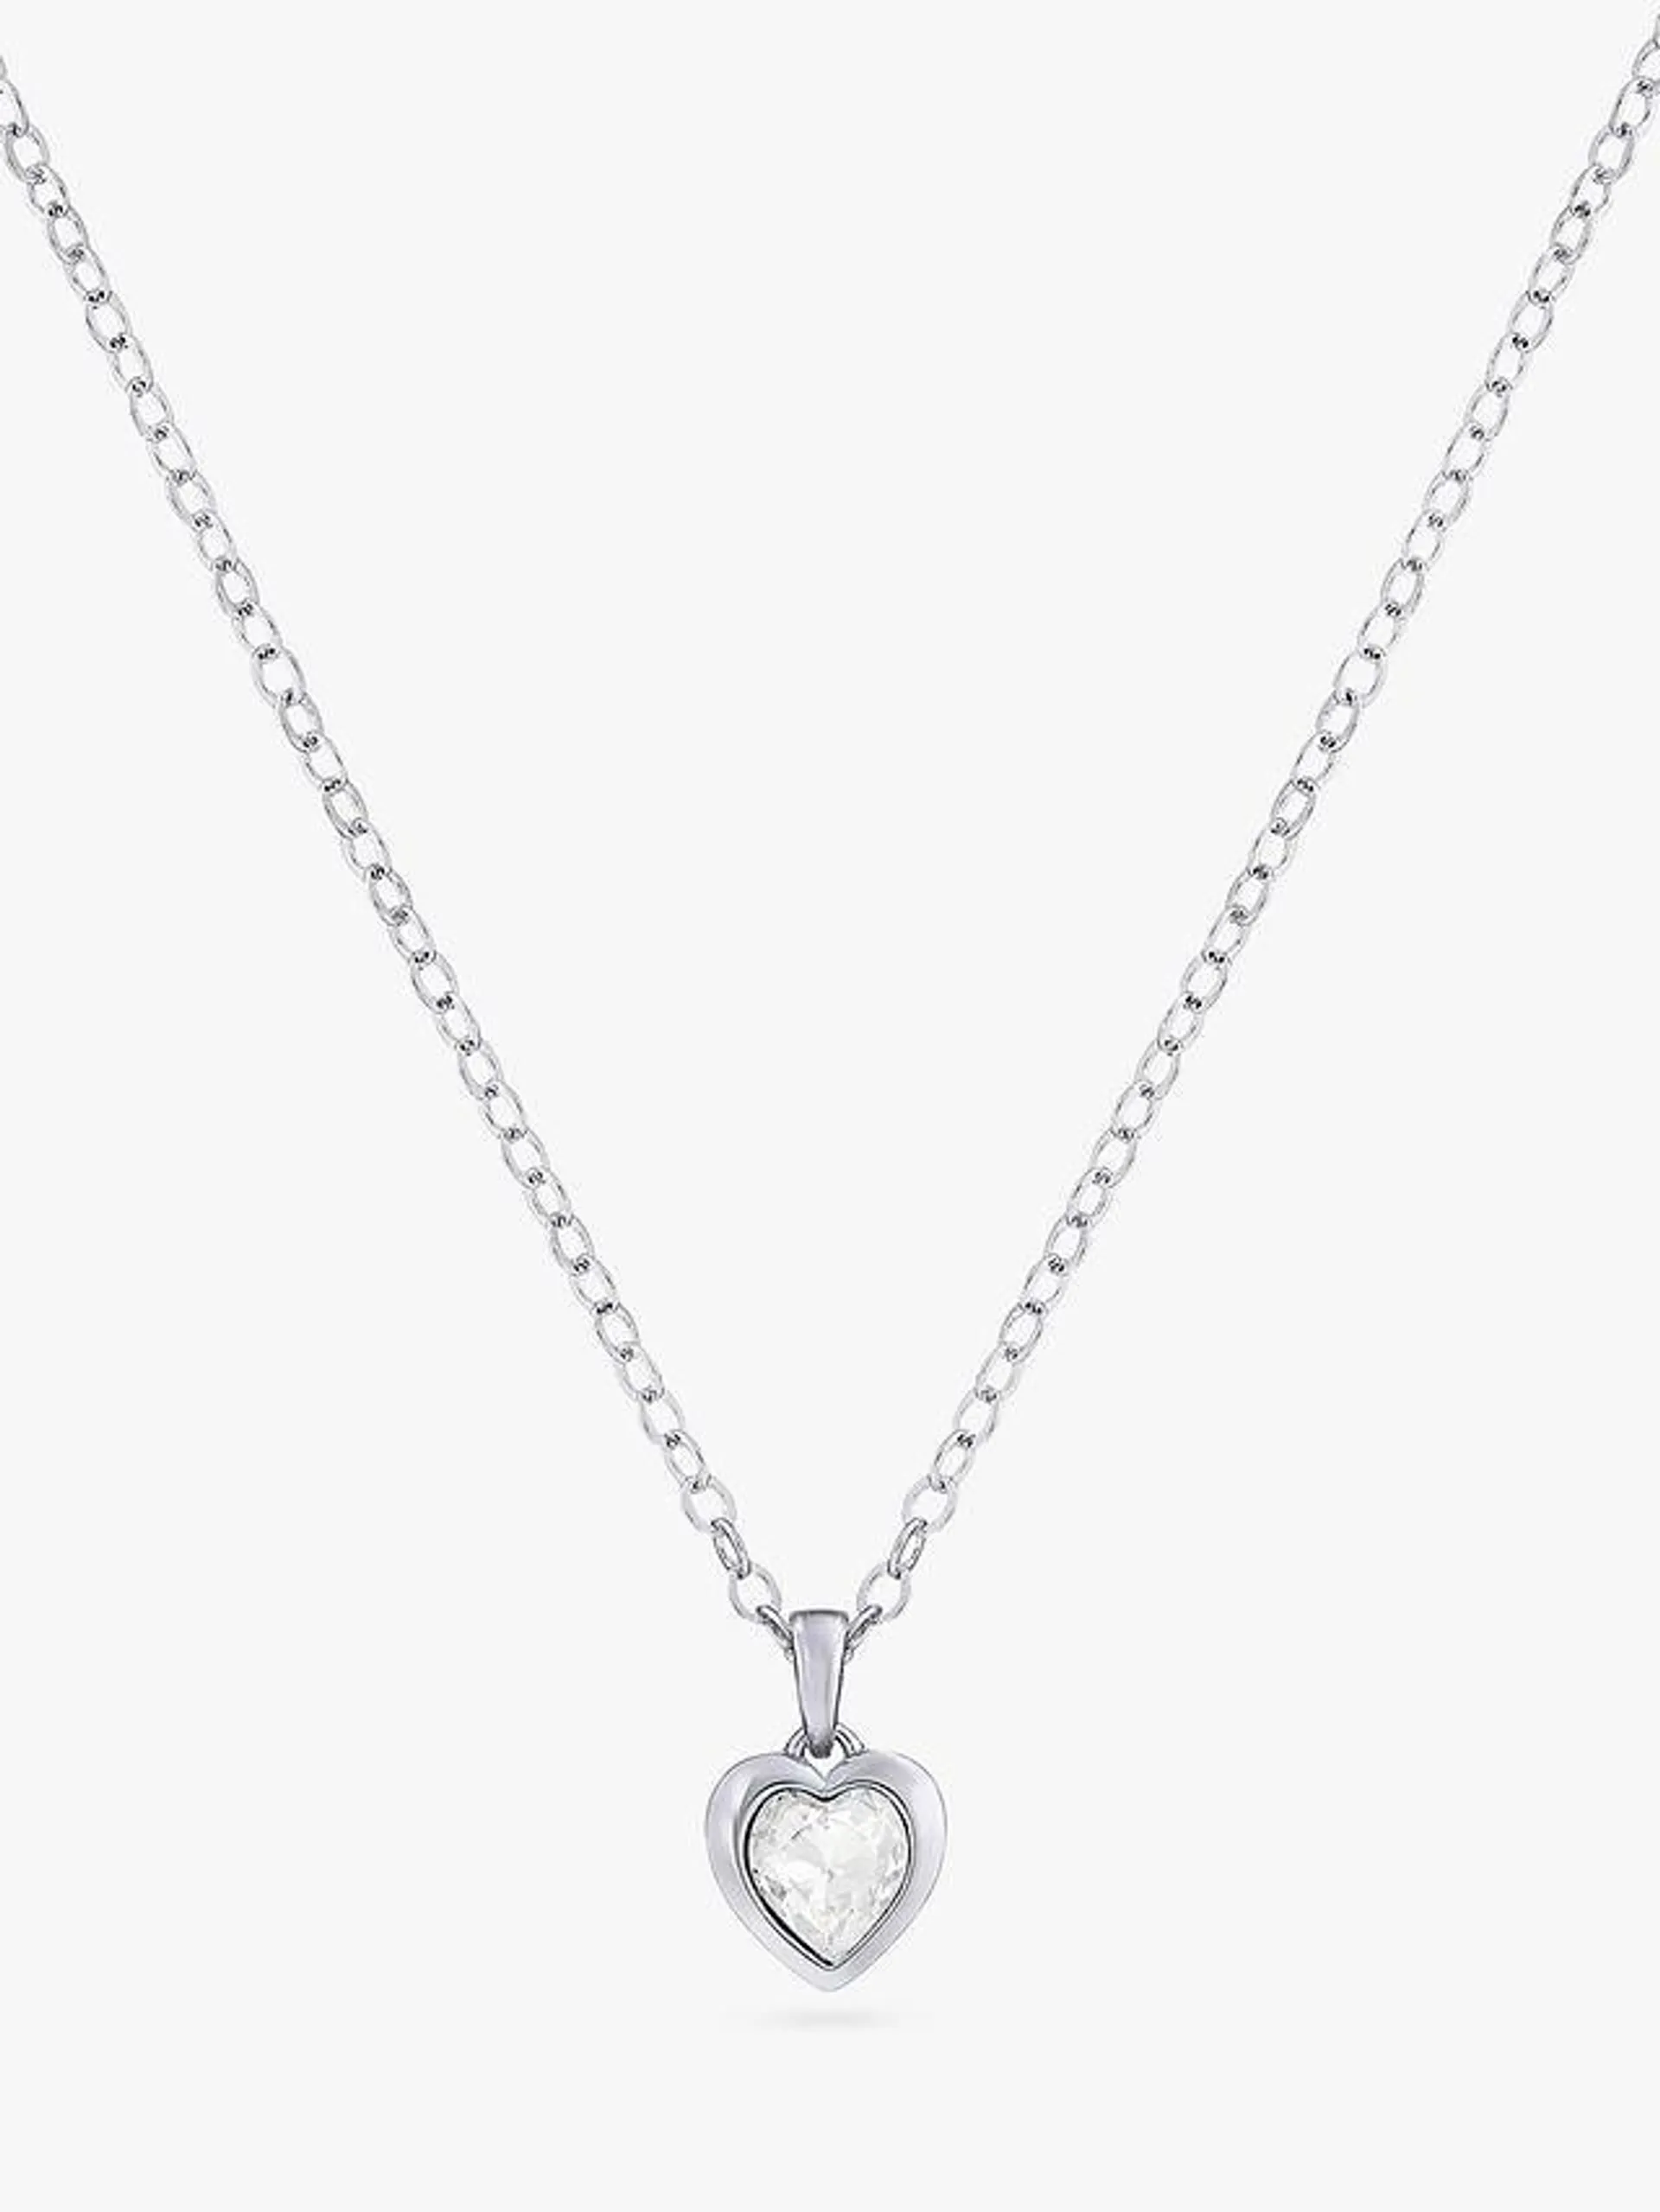 Ted Baker Crystal Heart Pendant Necklace, Silver